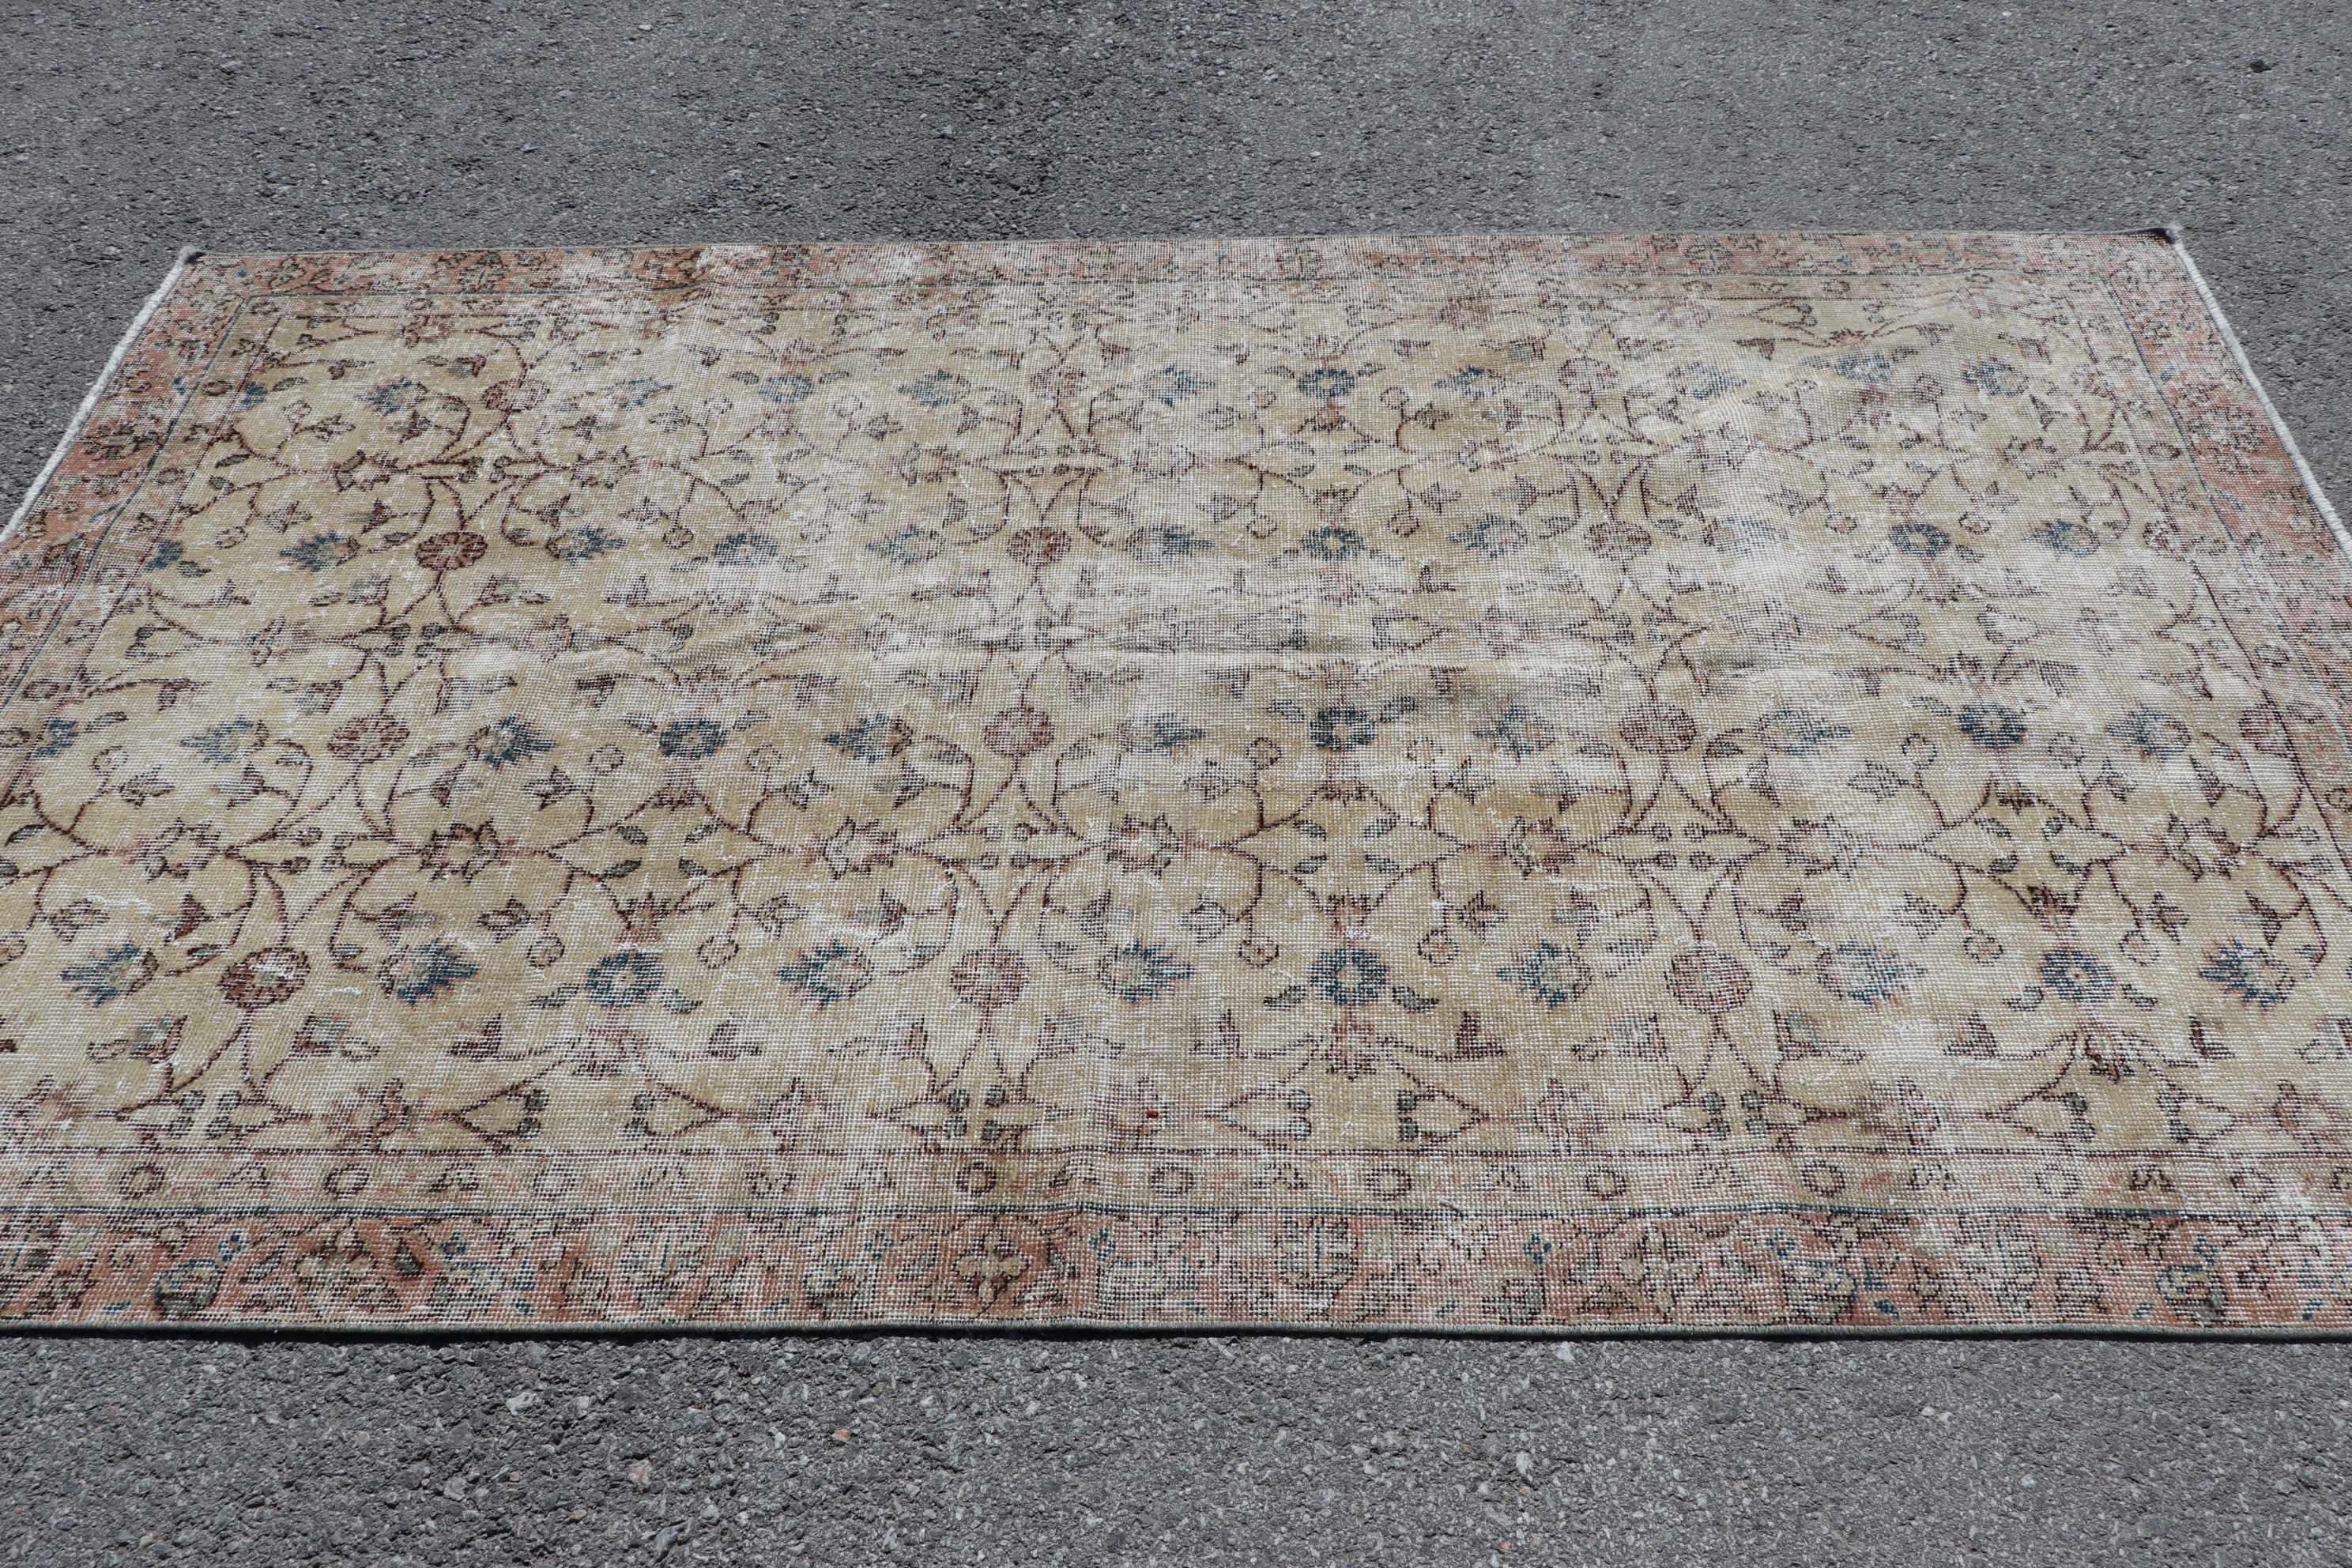 Rugs for Kitchen, Turkish Rug, 4.7x7.9 ft Area Rug, Beige Anatolian Rugs, Home Decor Rugs, Vintage Rug, Living Room Rugs, Antique Rug